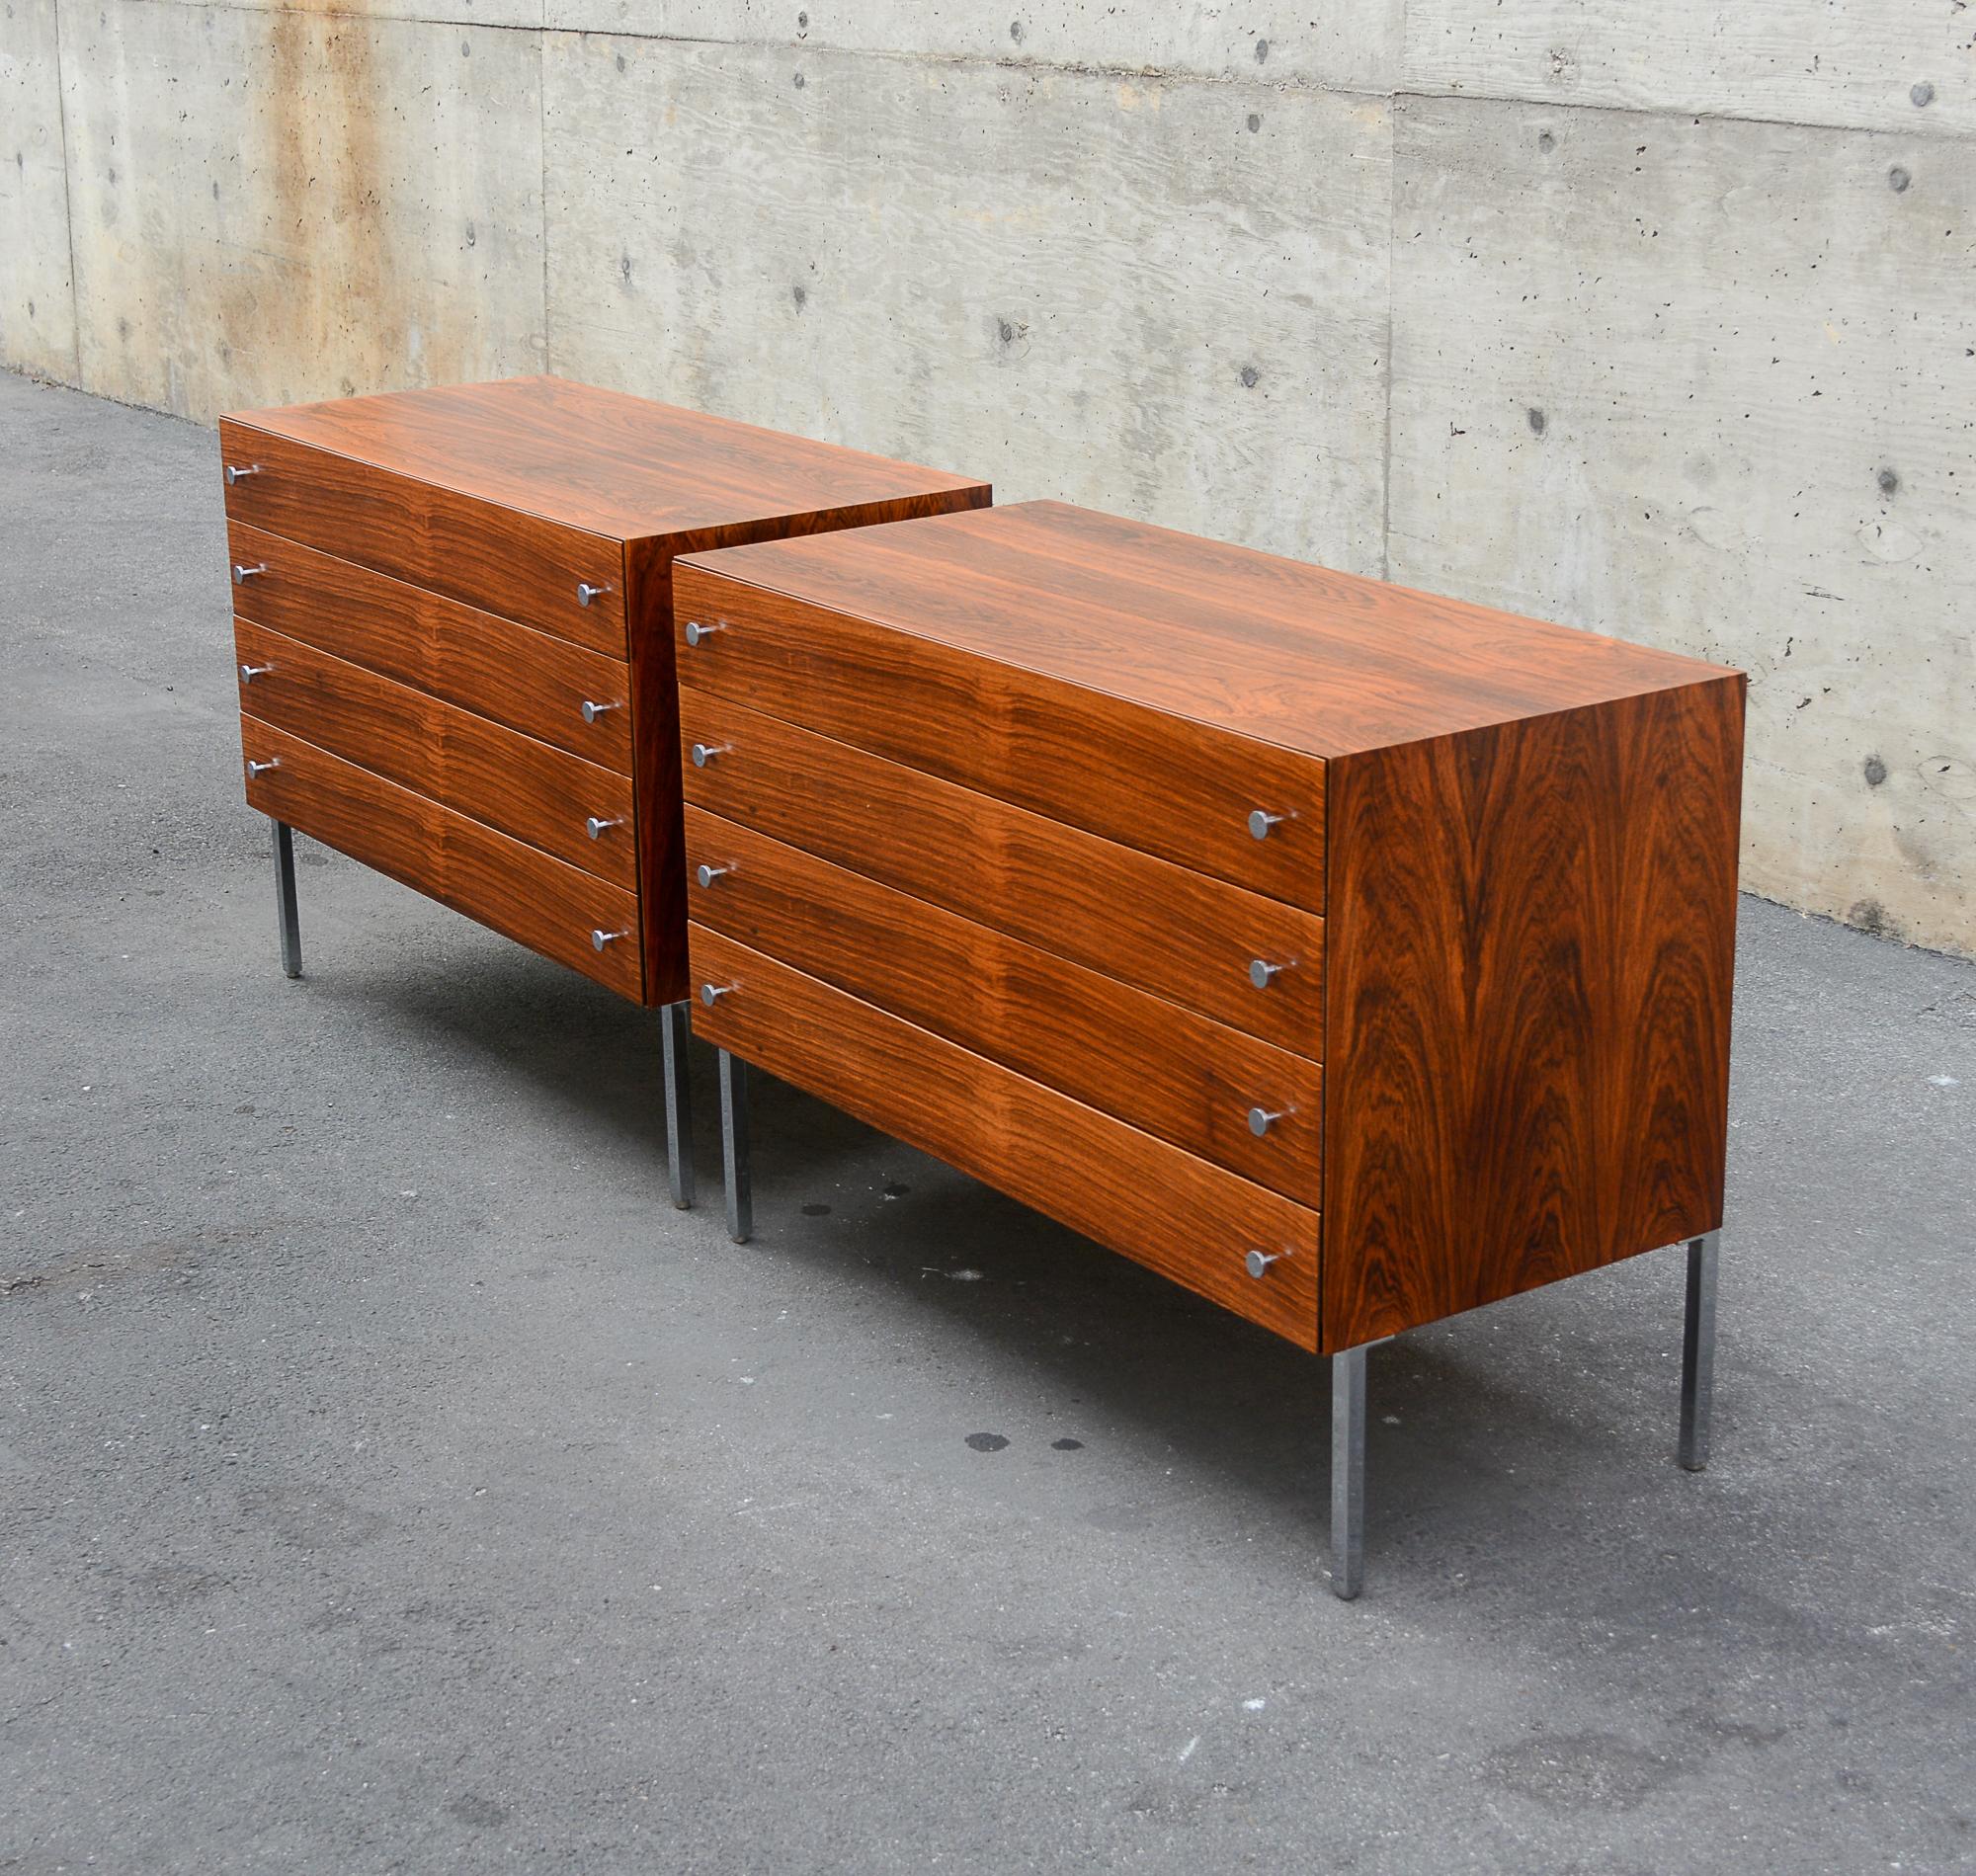 Pair of Rosewood Chests by Poul Norreklit for Sigurd Hansen im Zustand „Gut“ im Angebot in San Mateo, CA